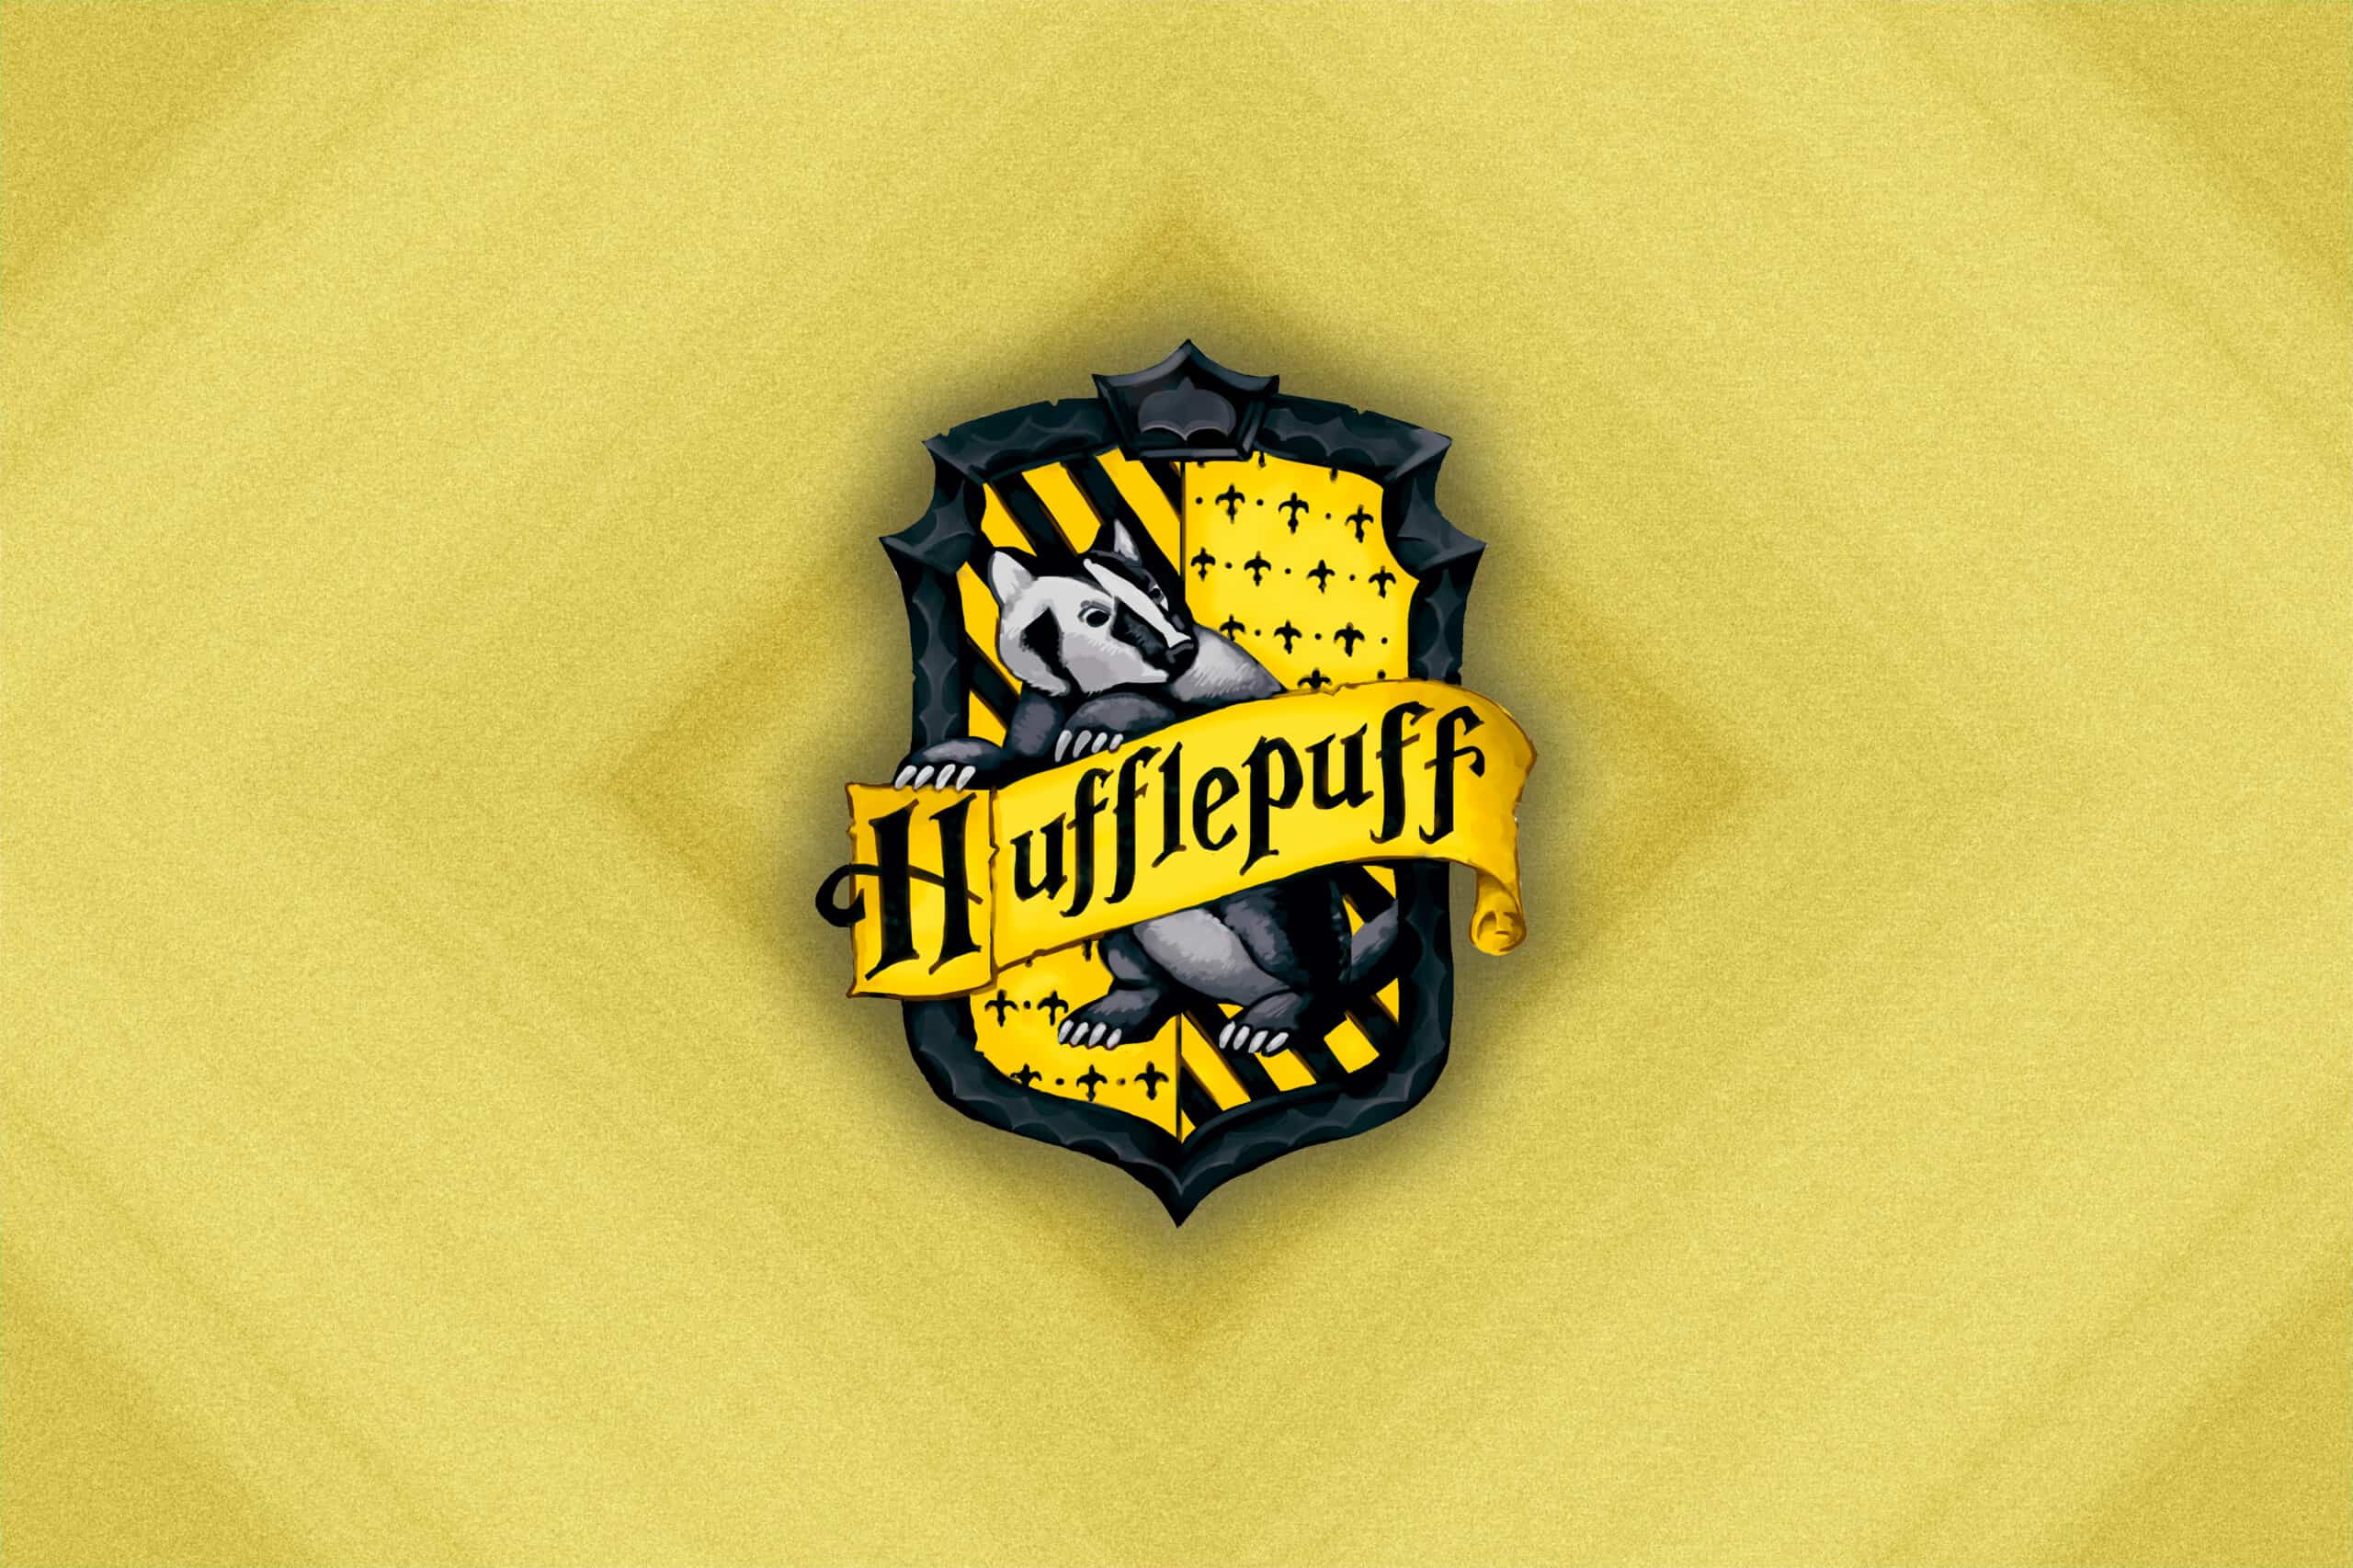 The Good / Bad Hufflepuff Traits in Harry Potter